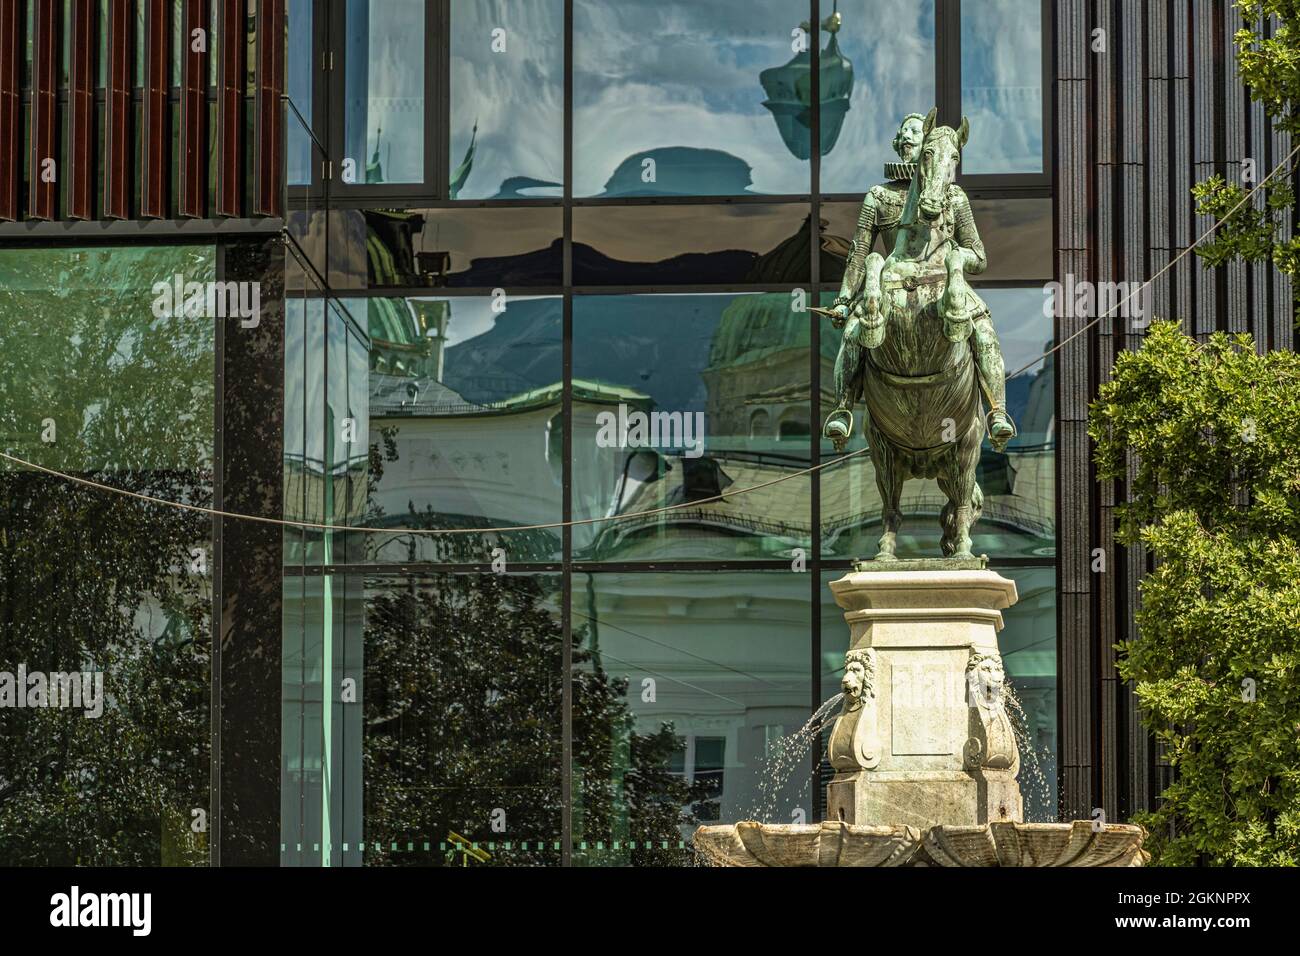 Fountain with an equestrian statue dedicated to Leopold Brunnen. Behind the windows of the House of Music in Innsbruck. Innsbruck, Tyrol, Austria Stock Photo